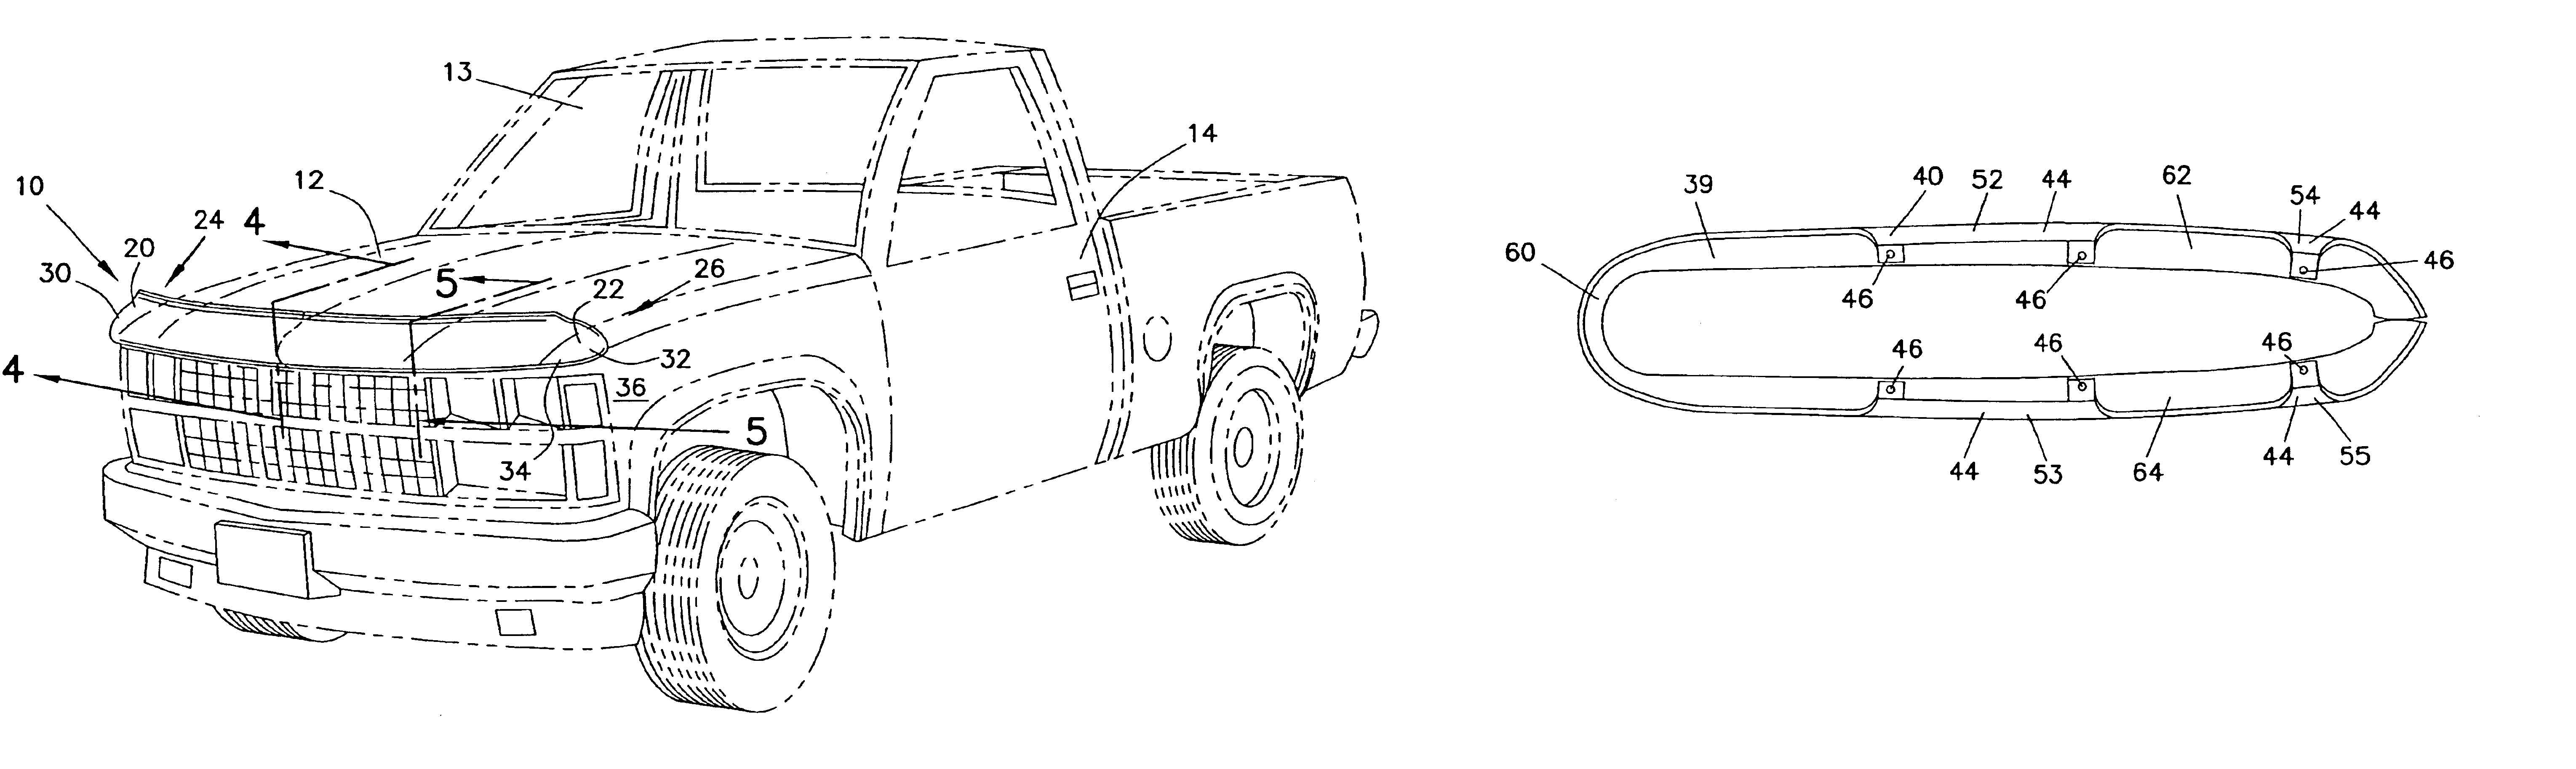 Vehicle shield device and methods for manufacturing and shipping a vehicle shield device